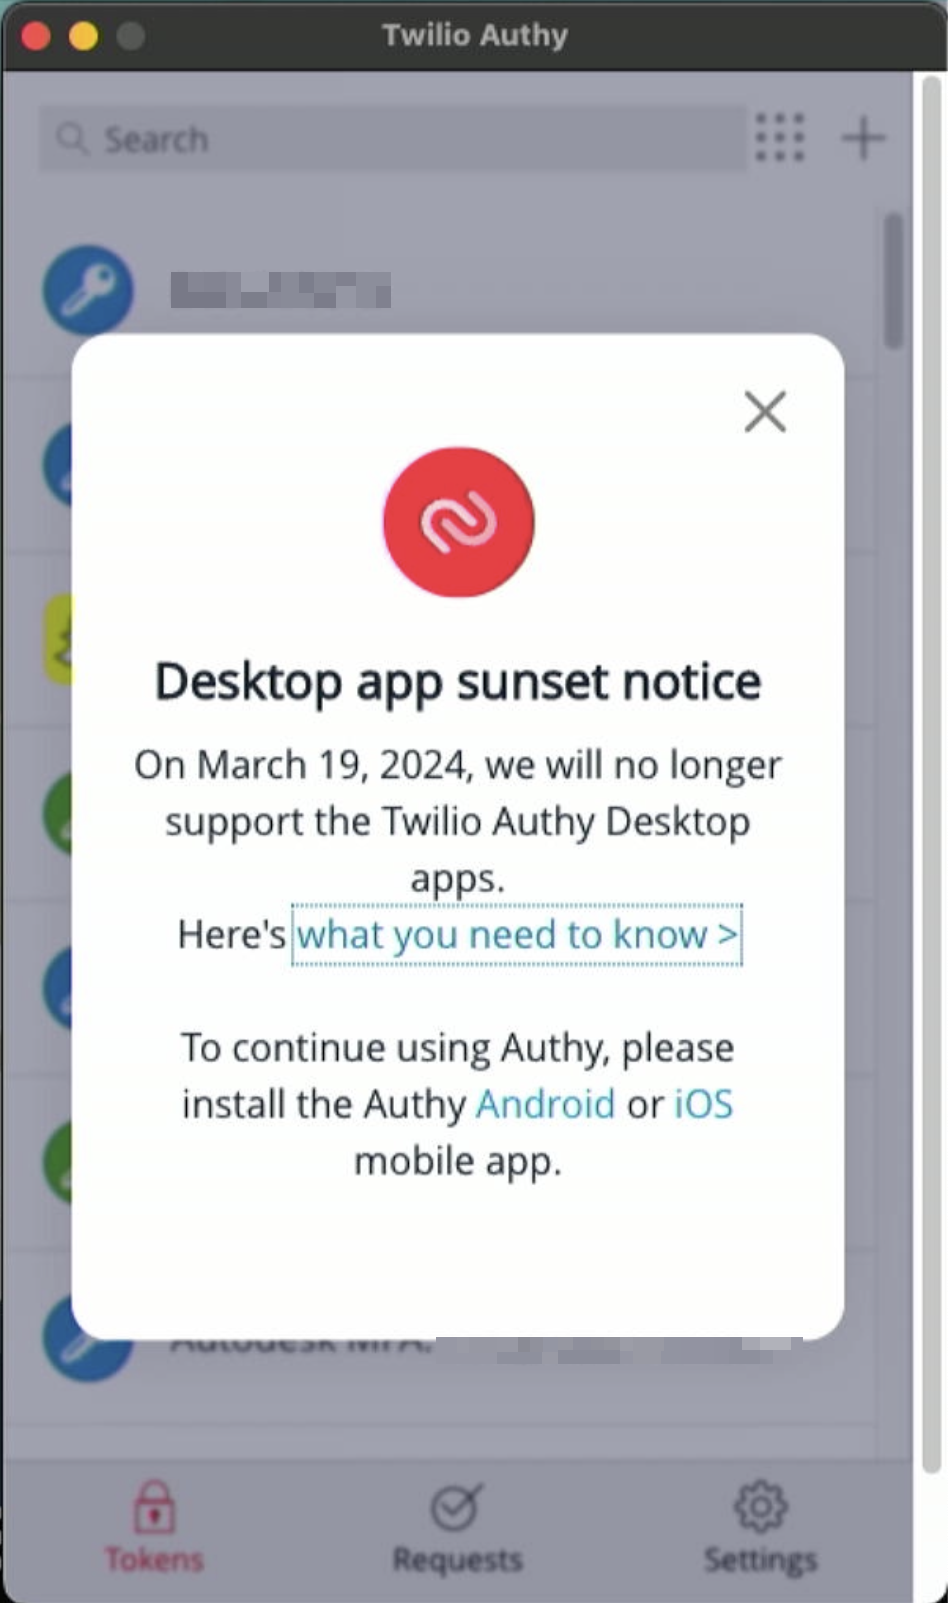 screenshot of Authy Desktop popup, "Desktop app sunset notice: On March 19, 2024, we will no longer support the Twilio Authy Desktop apps. Here's what you need to know. To continue using Authy, please install the Authy Android or iOS mobile app."